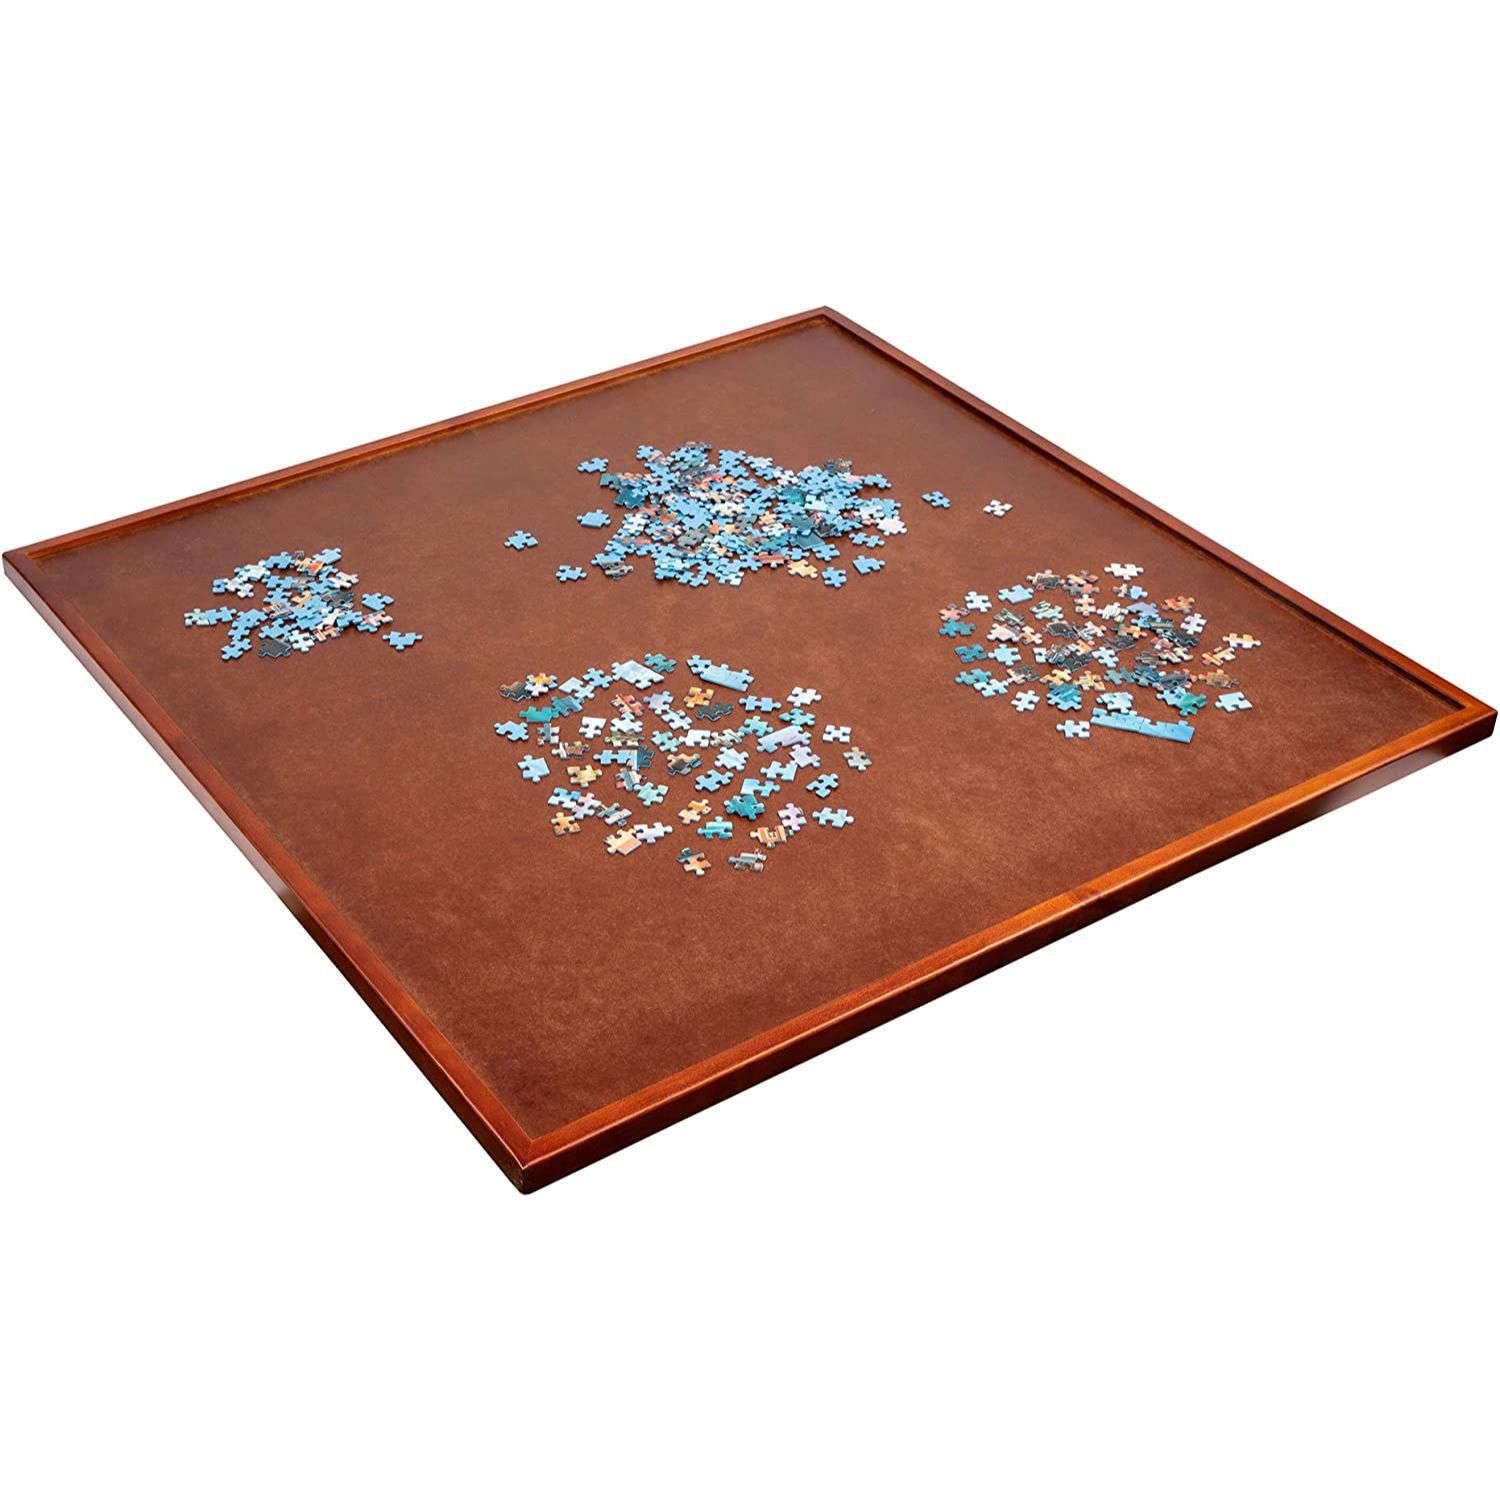 Bright Creations Blank Wooden Puzzle, Unfinished, Customizable